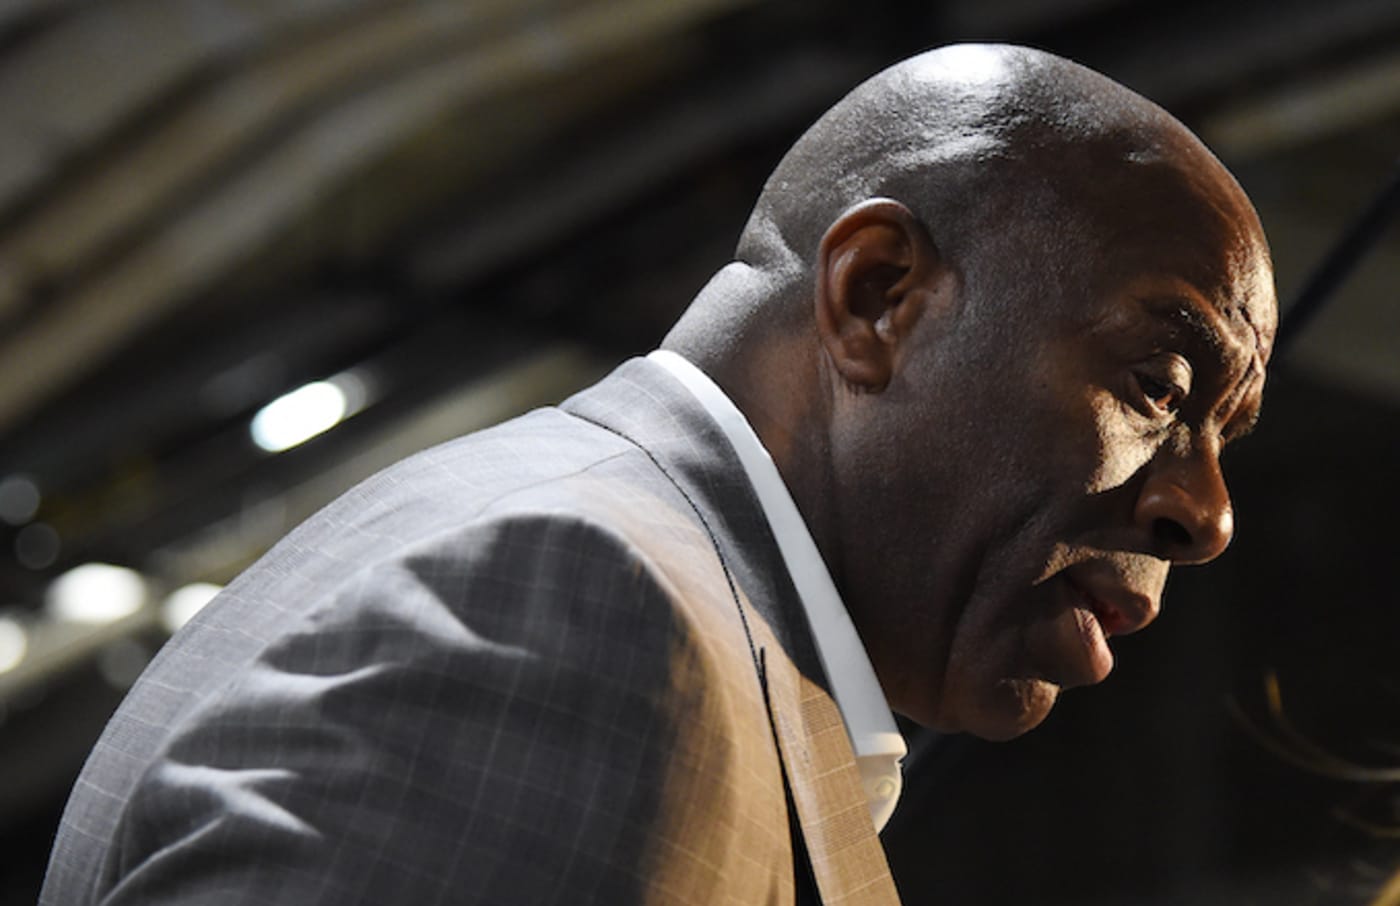 Magic Johnson looks on during the game between the Portland Trail Blazers and Los Angeles Lakers